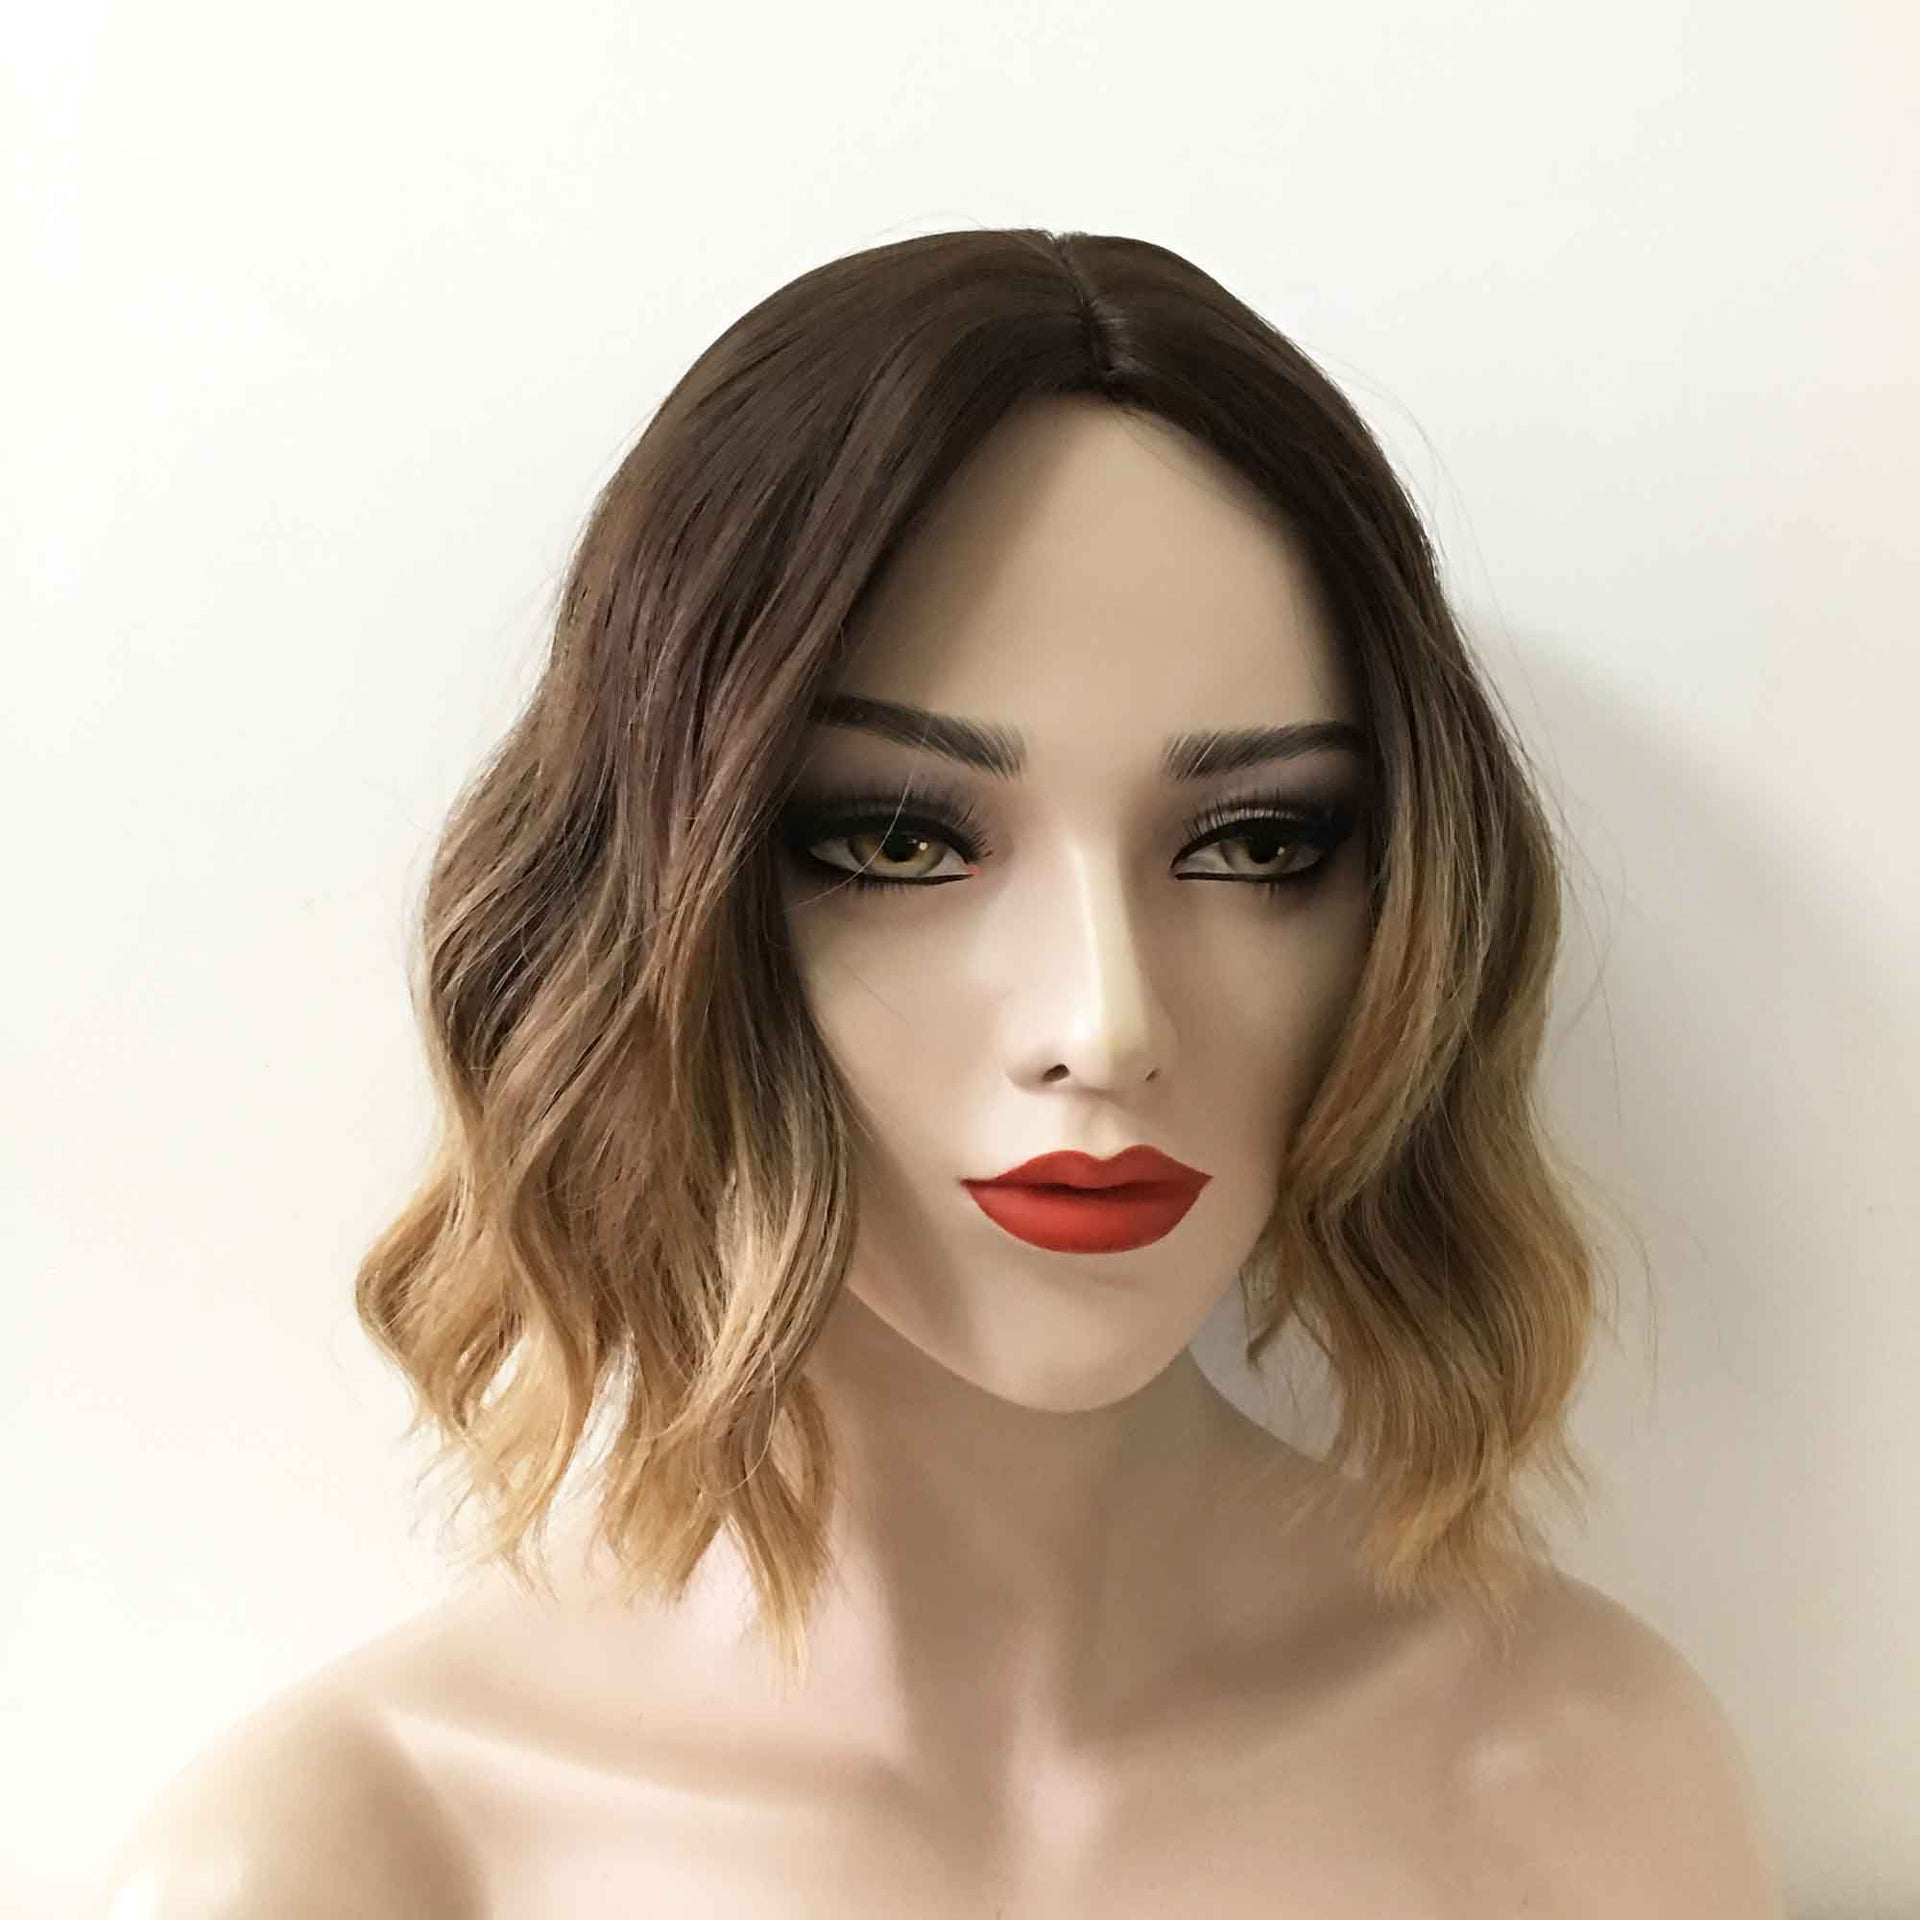 nevermindyrhead Women Ombre Dark Brown Blonde Short Curly Middle Part Bob Wig